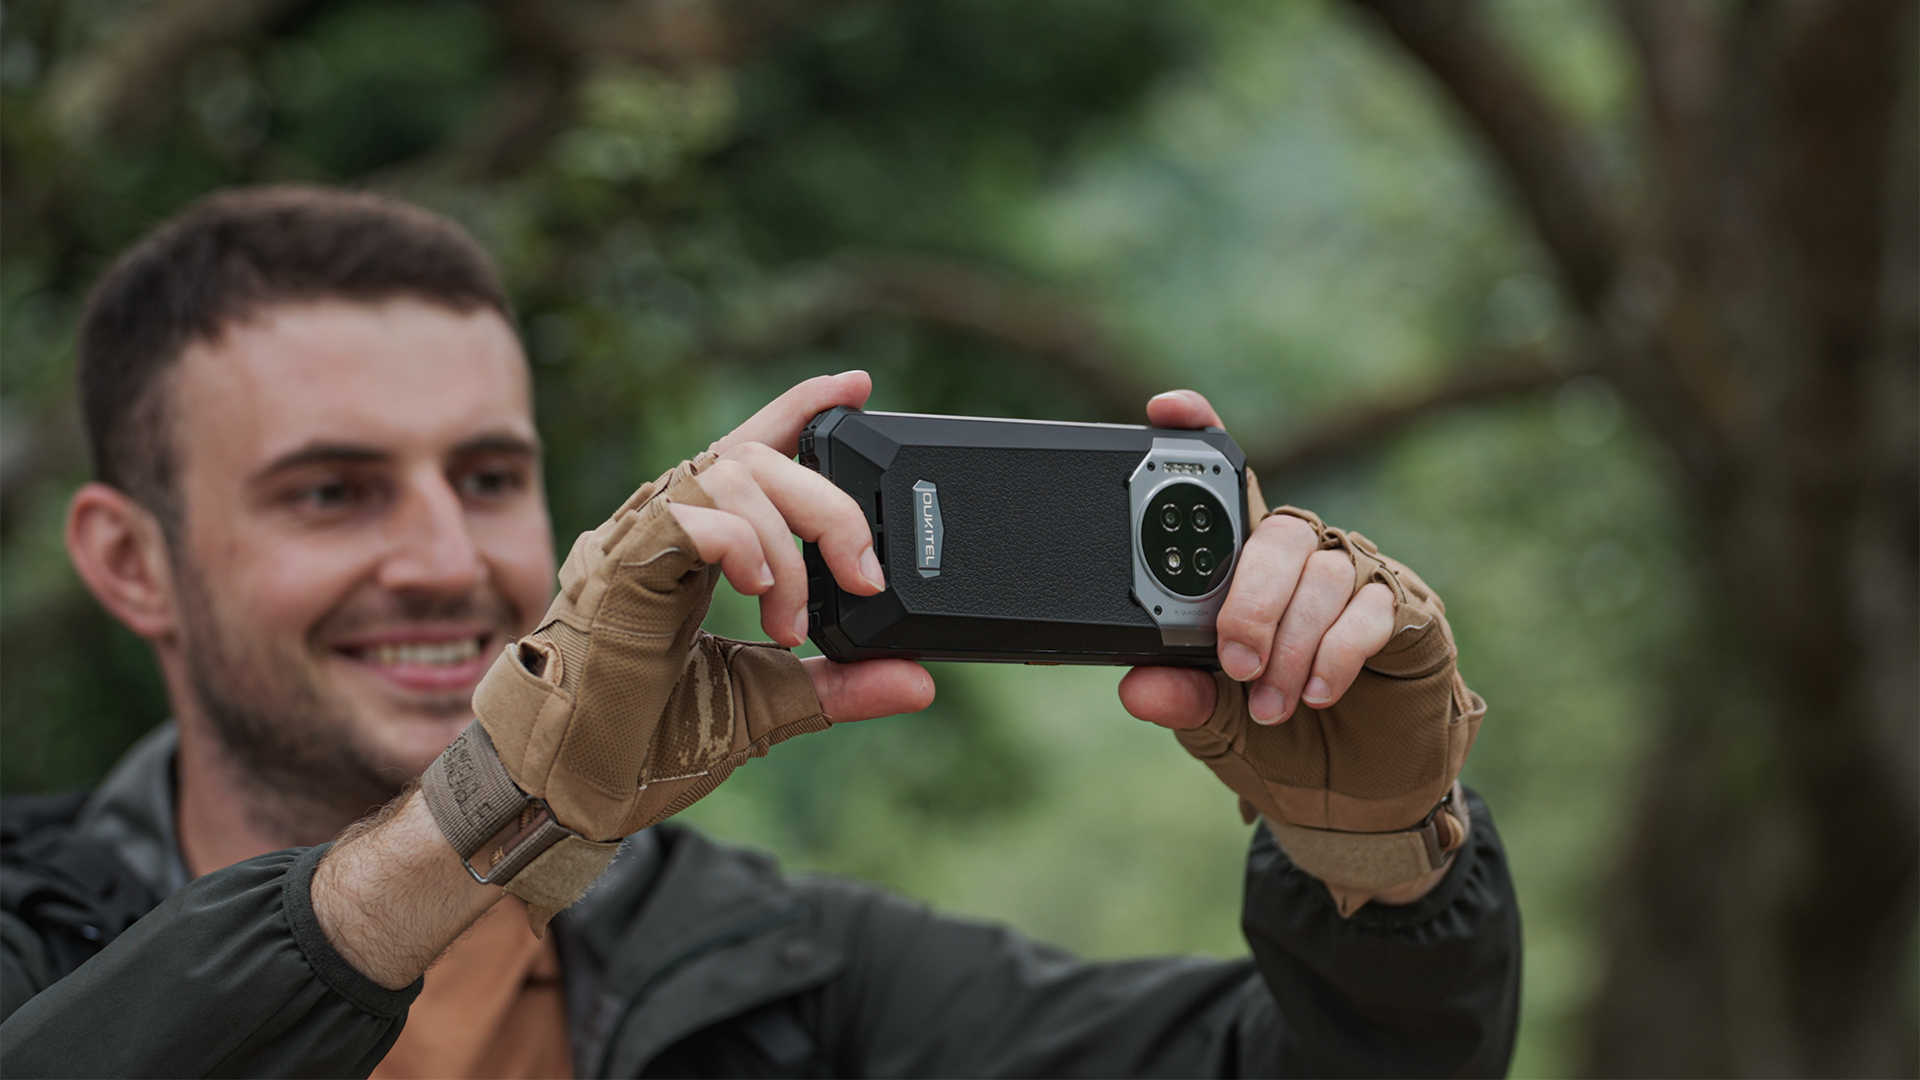 Oukitel WP19 World’s Most Powerful Outdoor Rugged Smartphone Available Globally Now